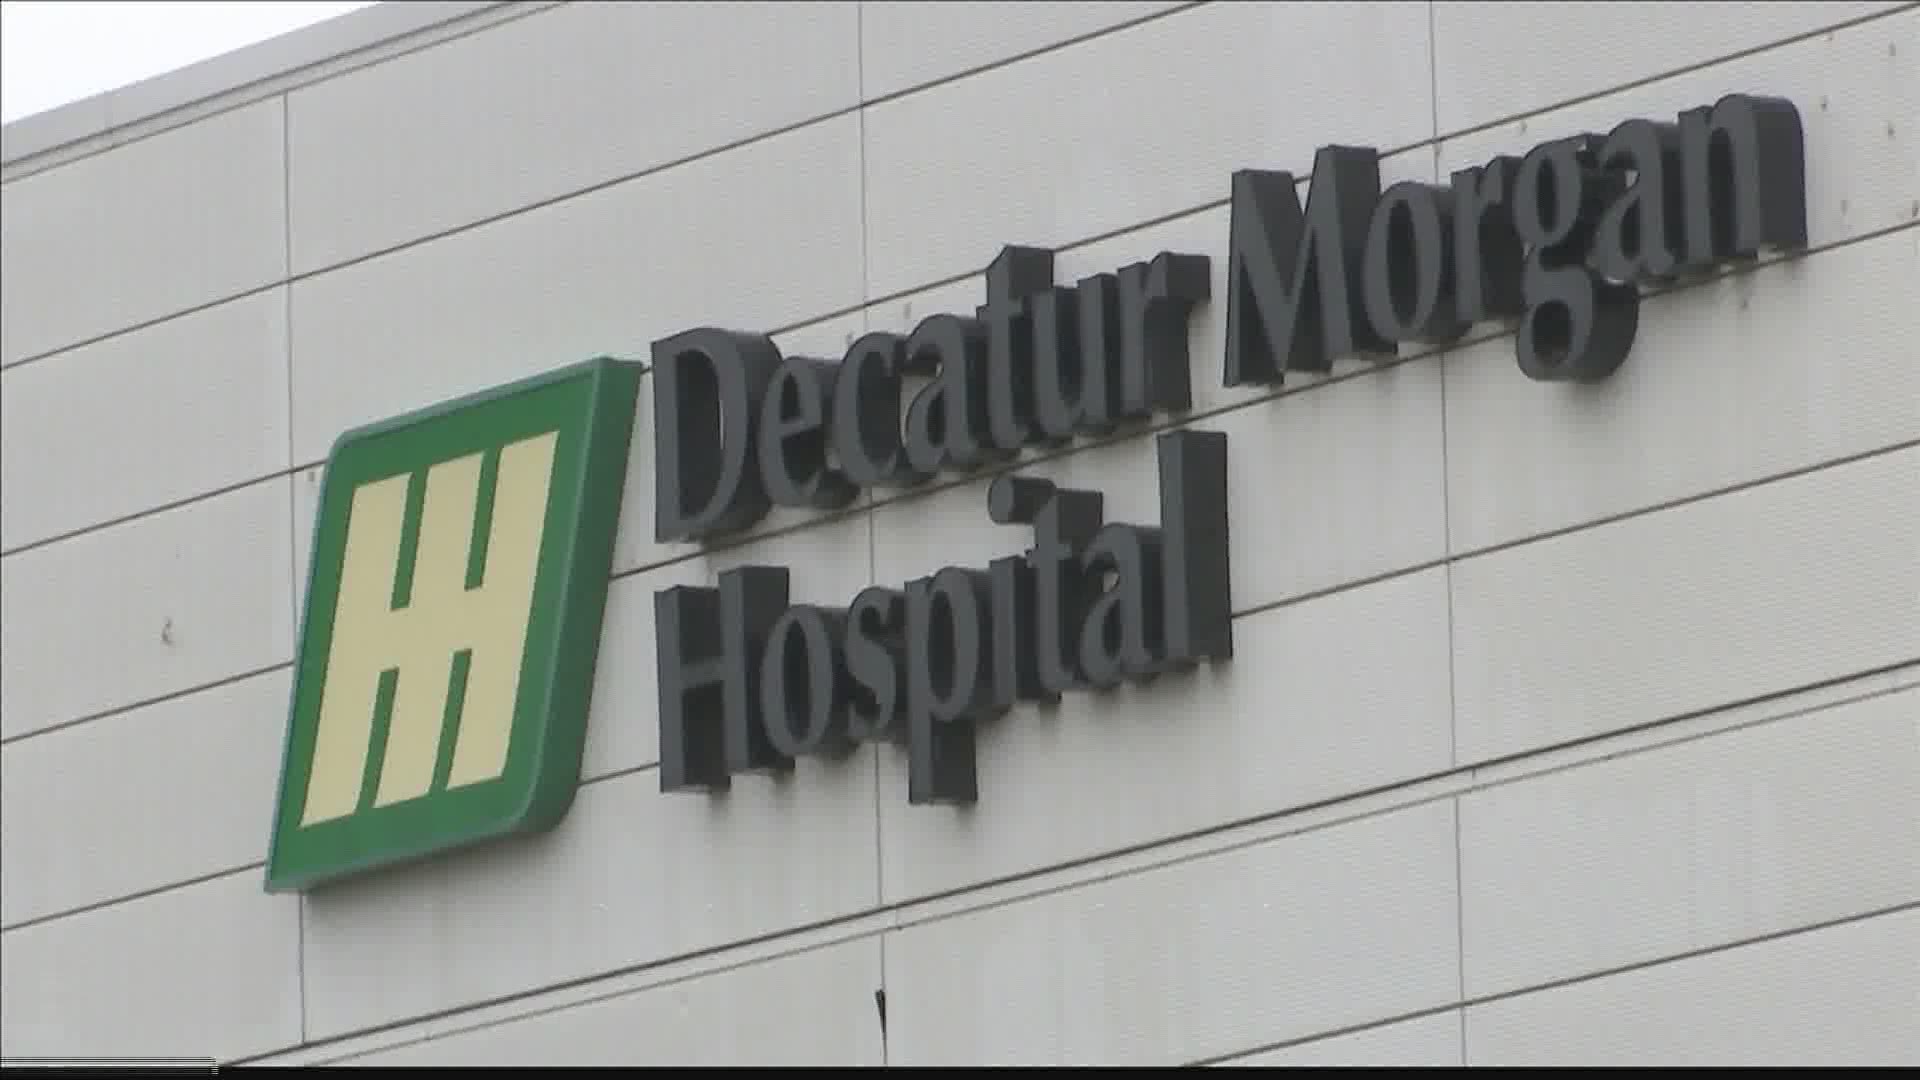 Decatur Morgan Hospital President Kelli Powers said they're taking every precaution possible to prevent the spread of the virus.